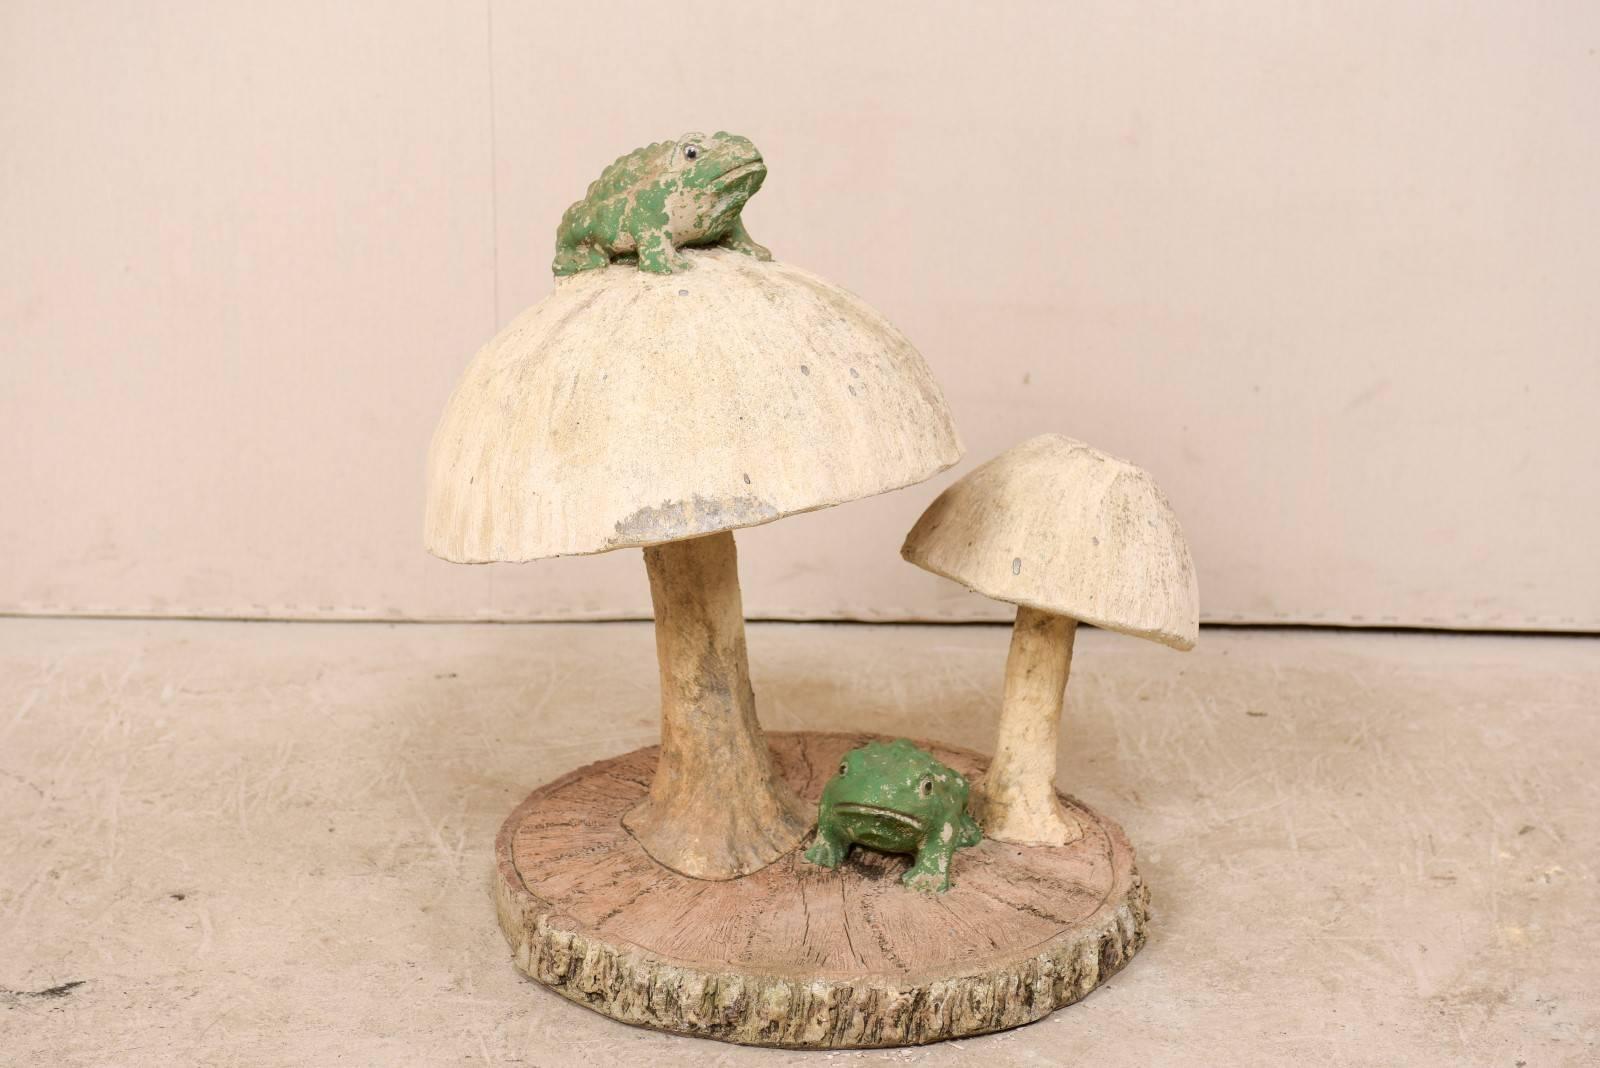 A whimsical midcentury garden sculpture depicting a pair of mushrooms and frogs atop a faux bois slab base. This folk art piece originated from Texas during the mid-20th century. This frog and mushroom themed vintage garden statuary stands at over 2